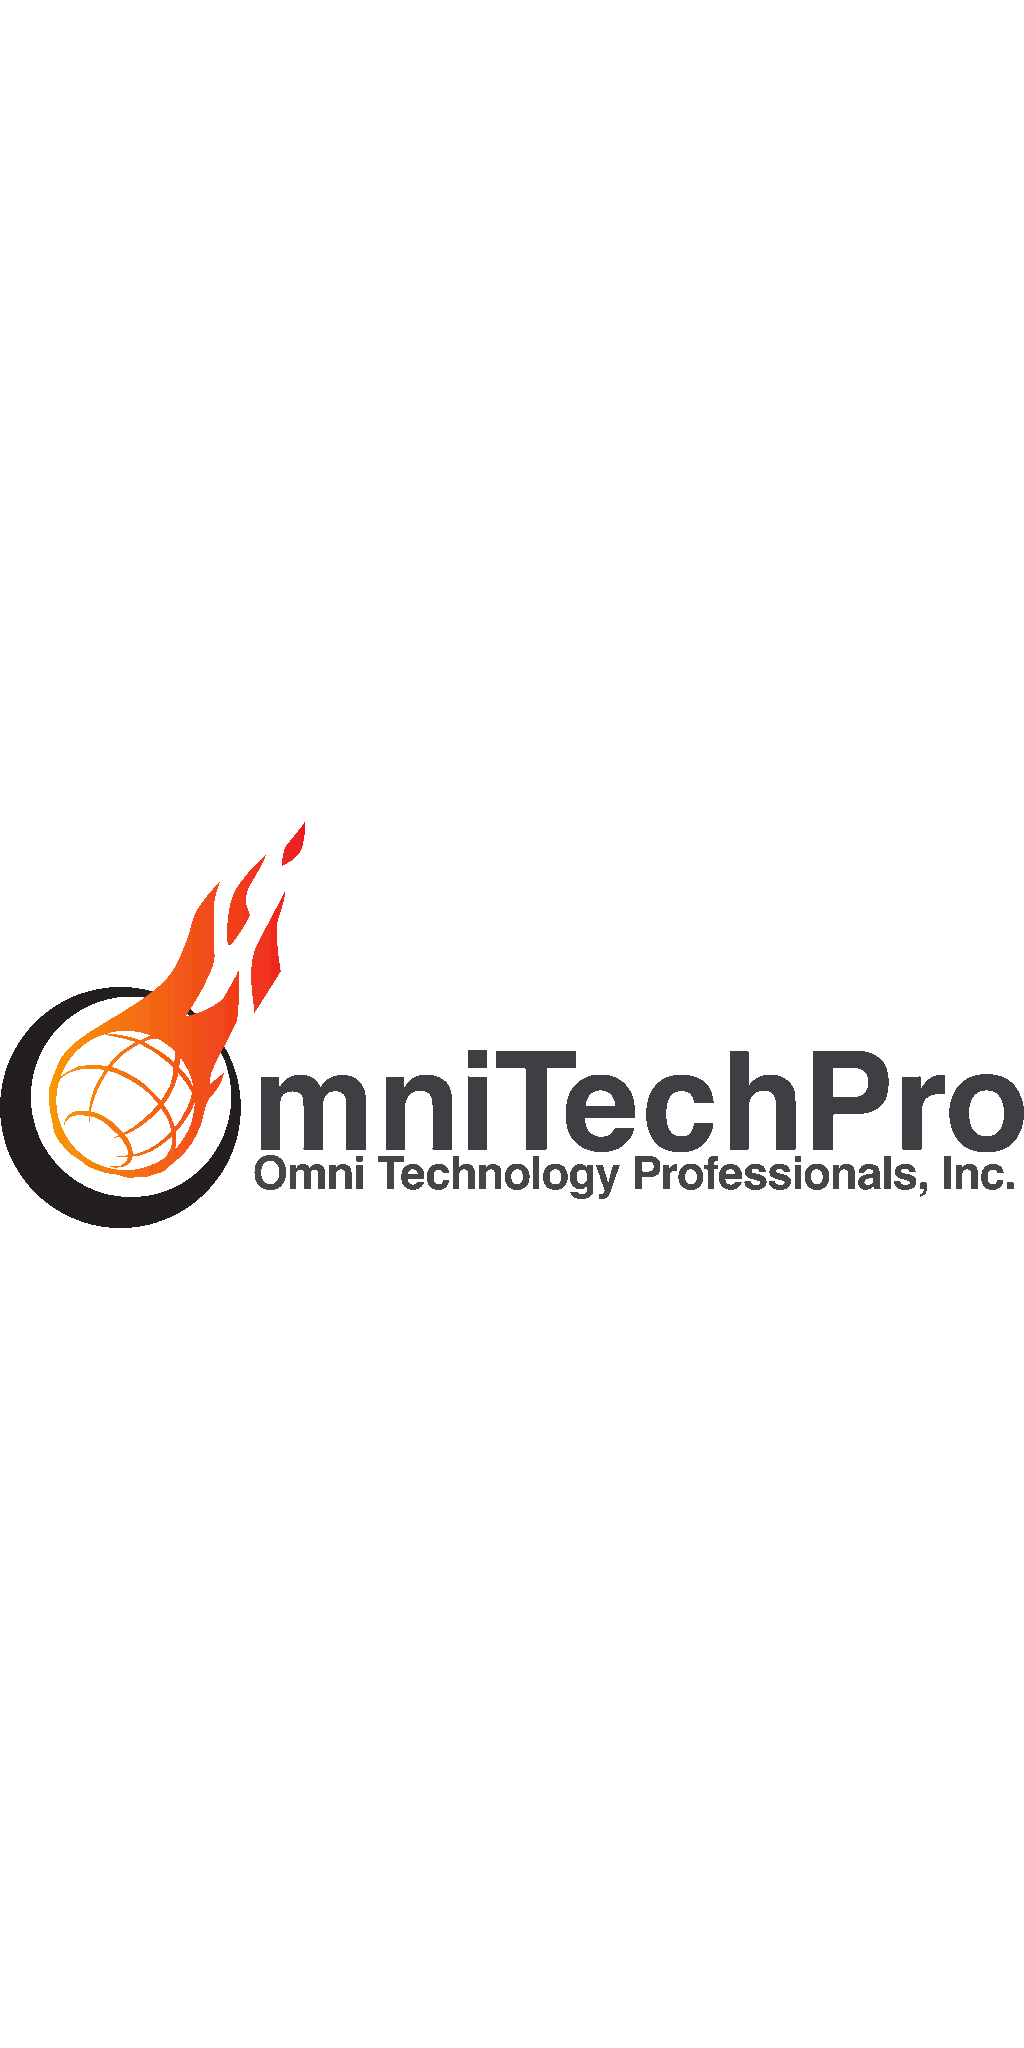 Stop Losing Money Because of Bad IT - OmniTechPro is Here to Help